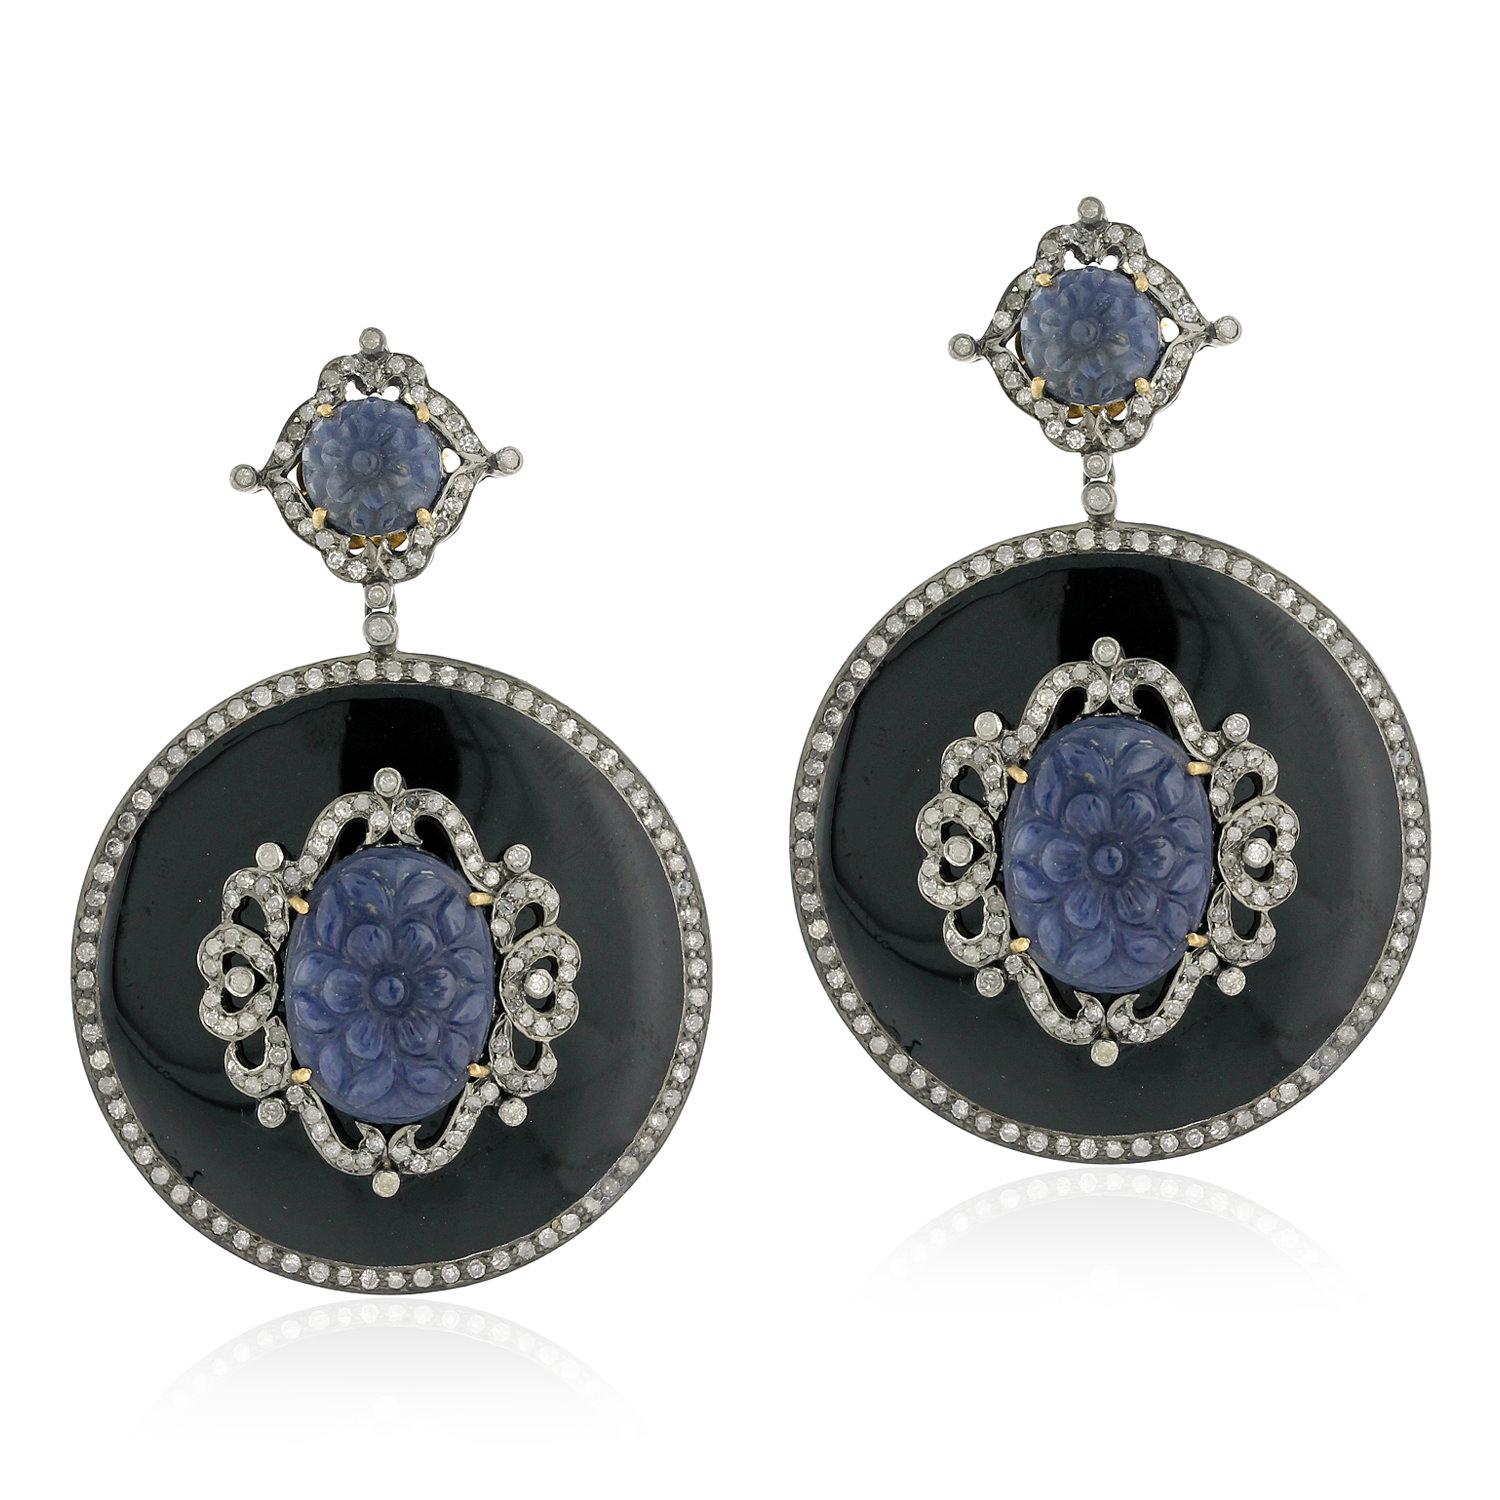 Round Black Enamel Earring with Hand Craved Sapphire and Diamonds motif in Gold and Silver is super pretty and attractive.

Closure: Push Post

18KT Gold: 1.83gms
Diamond: 2.79cts
SiIver: 30.82gms
Sapphire: 21.8cts
